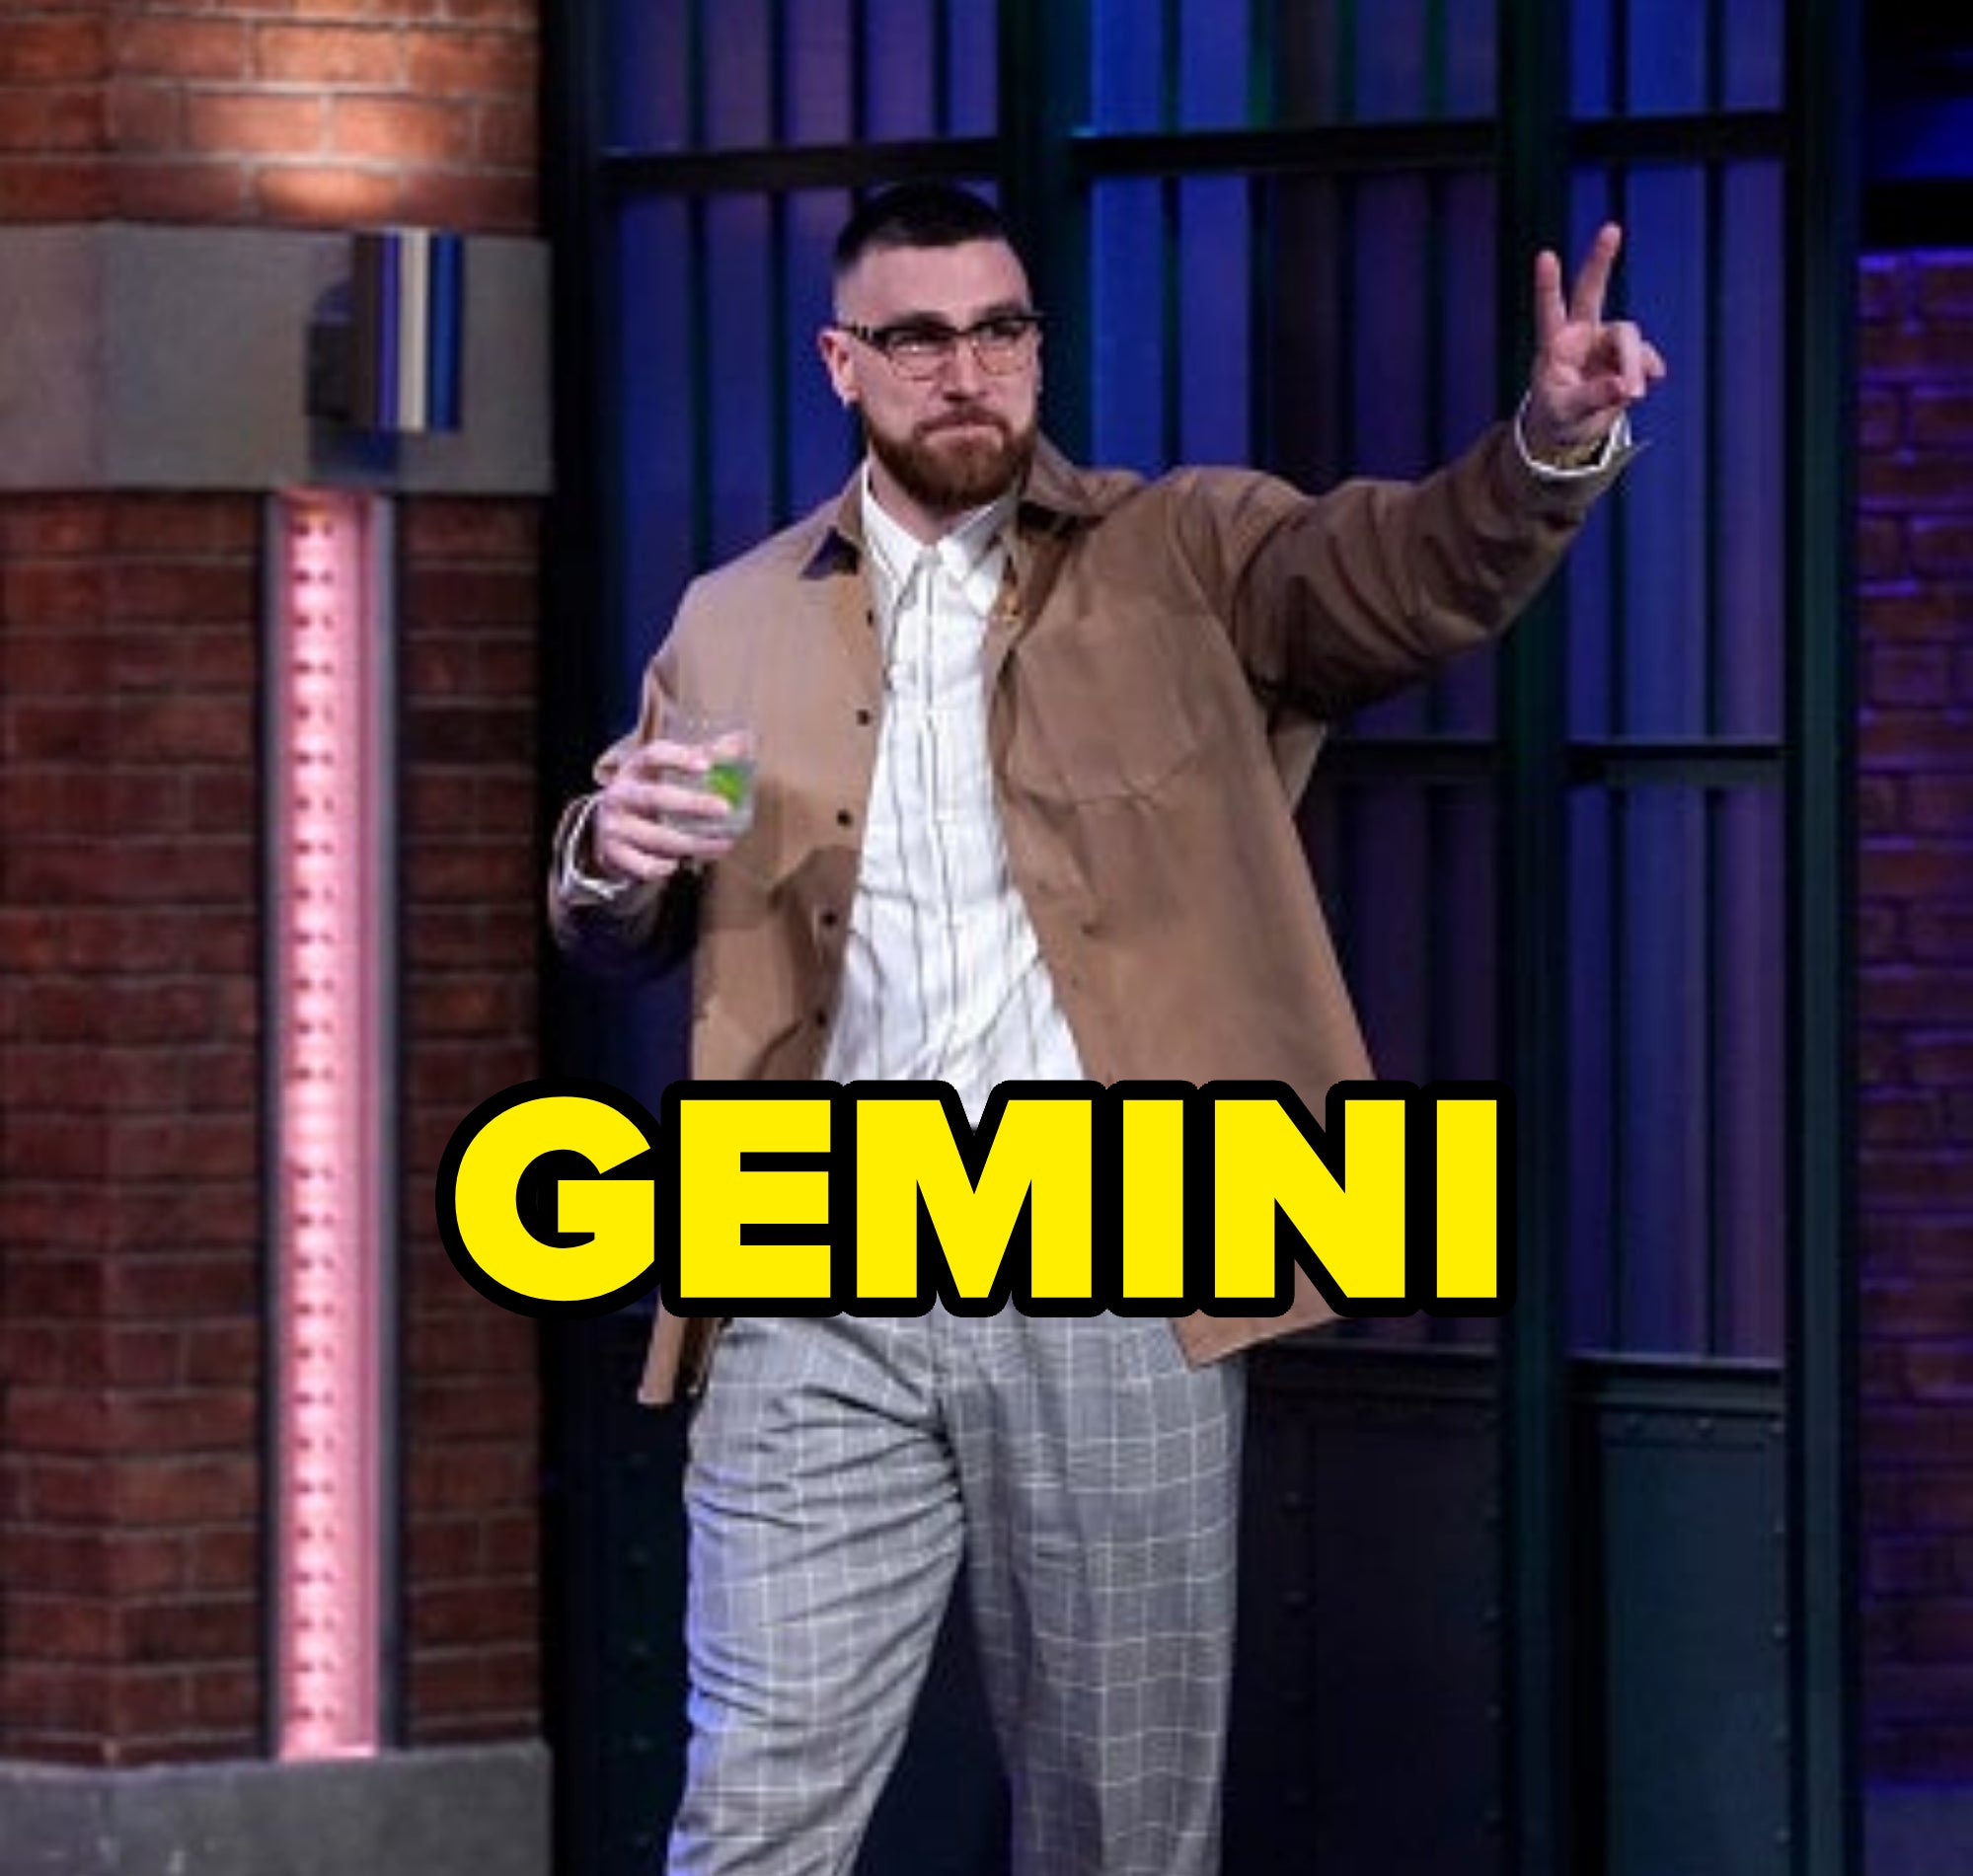 him walking out to a talk show holding a drink and giving the peace with text over reading gemini